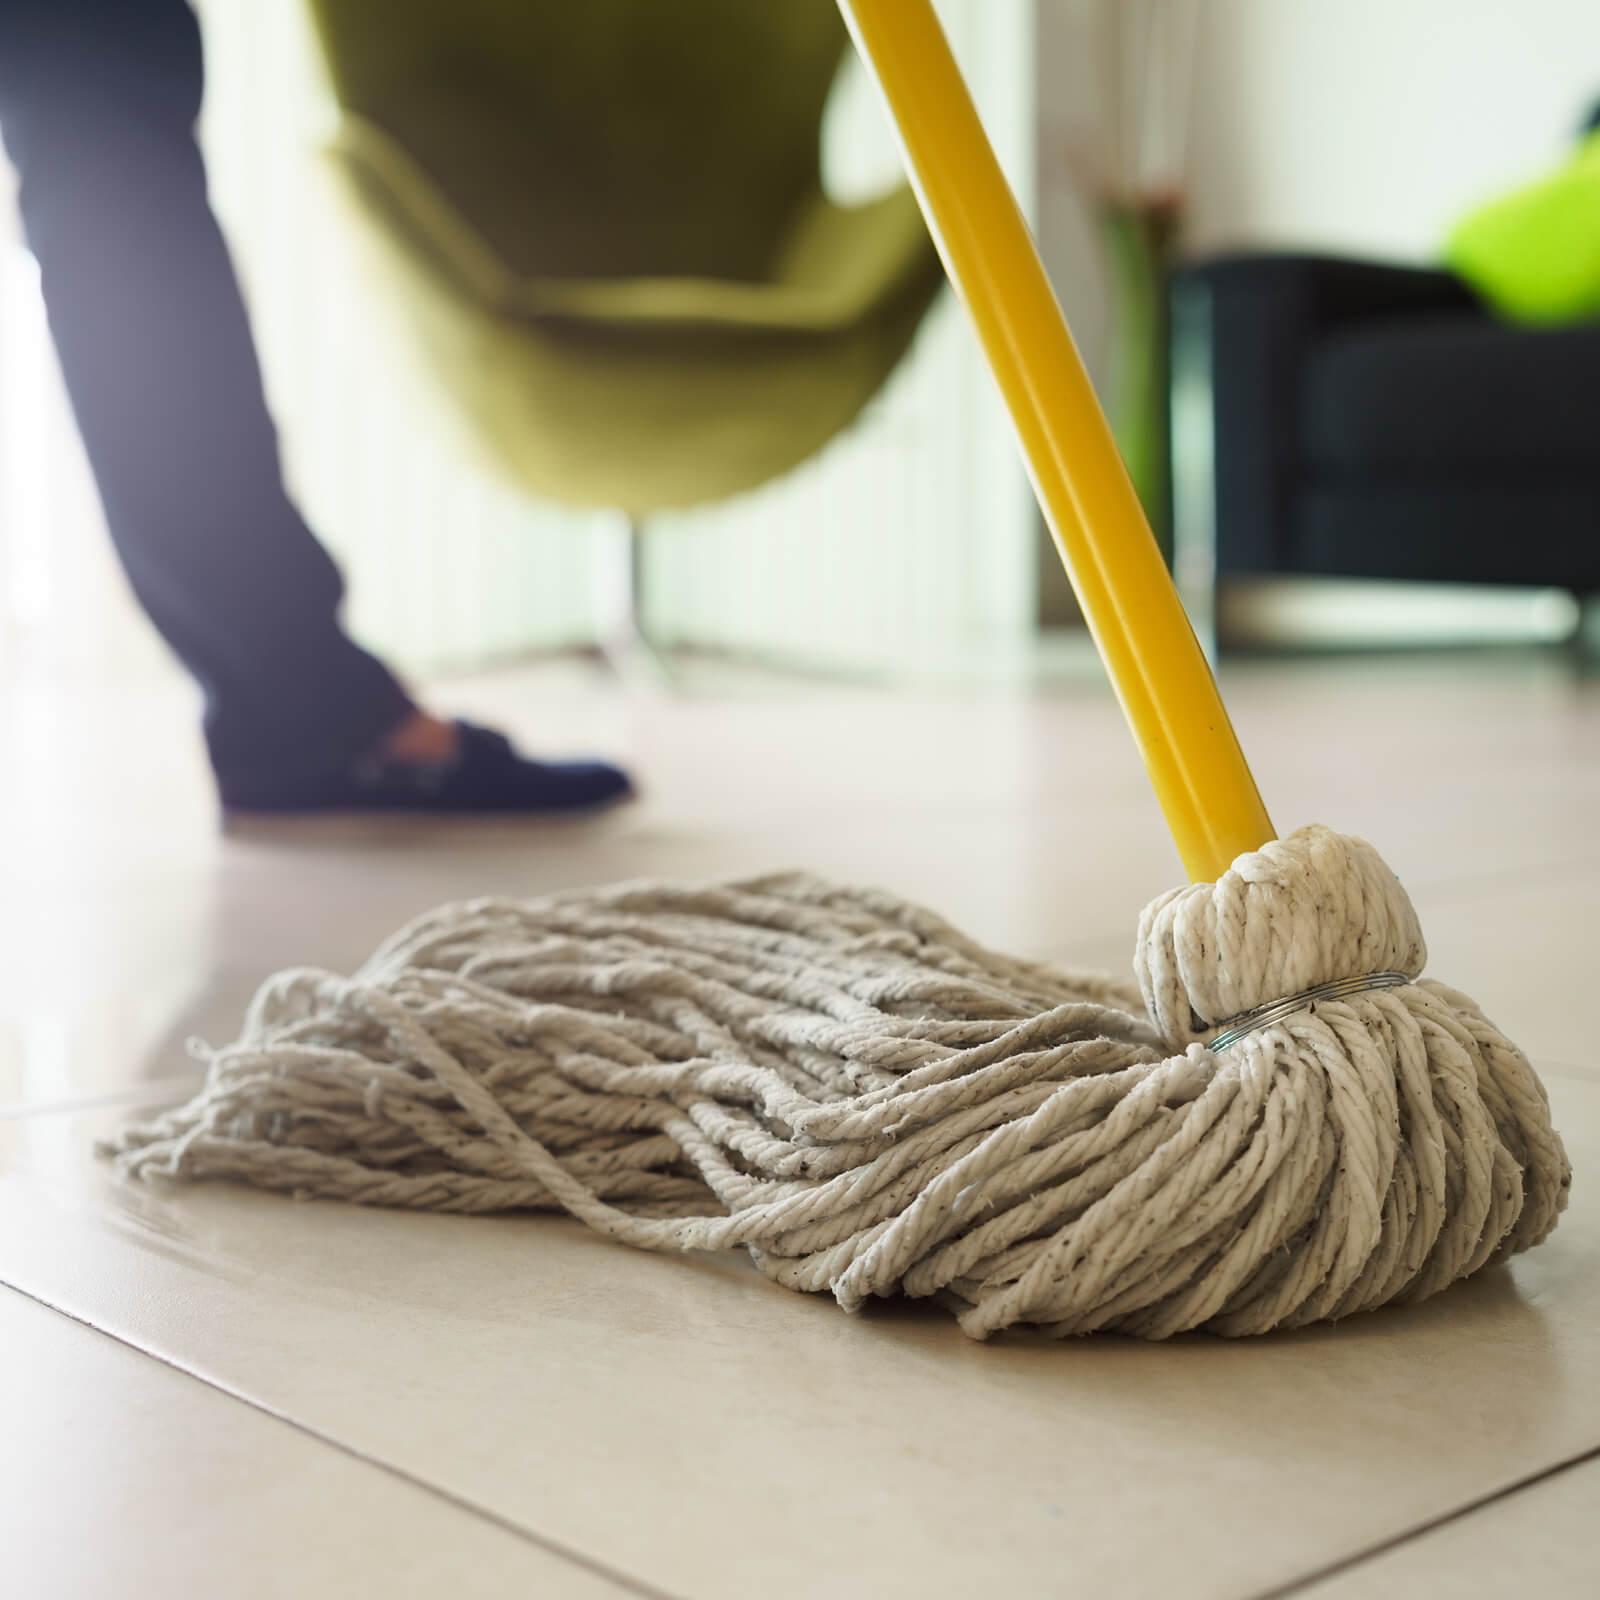 Mopping a tile floor | Flooring Direct